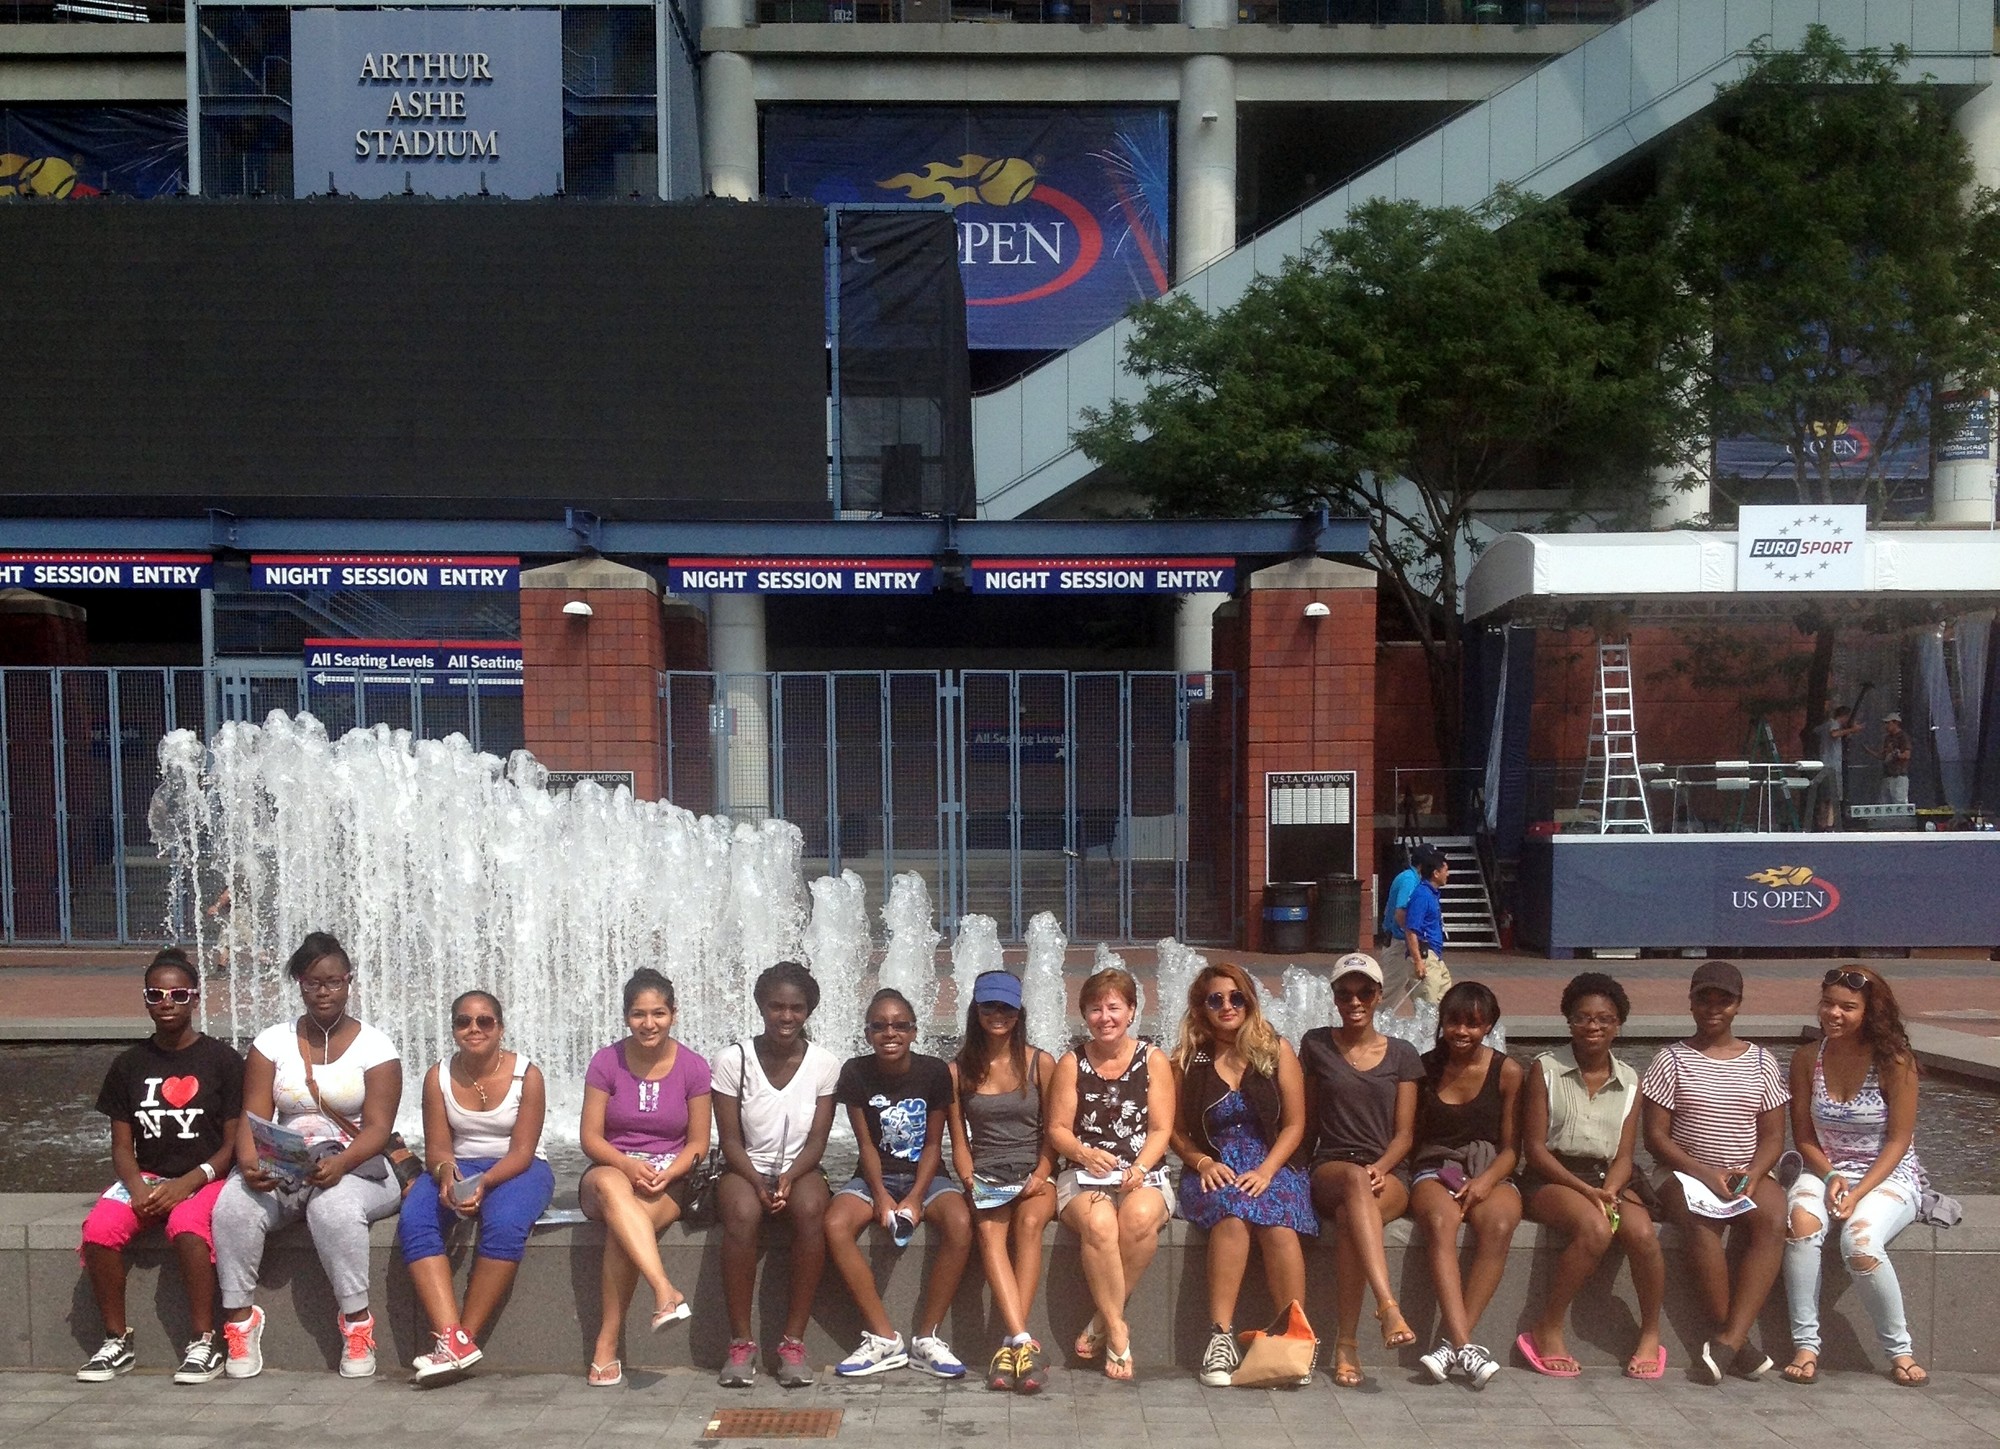 The Malverne High School girls’ tennis team visited the Billie Jean King National Tennis Center last week during the qualifying rounds with their coach, Patti Ward.